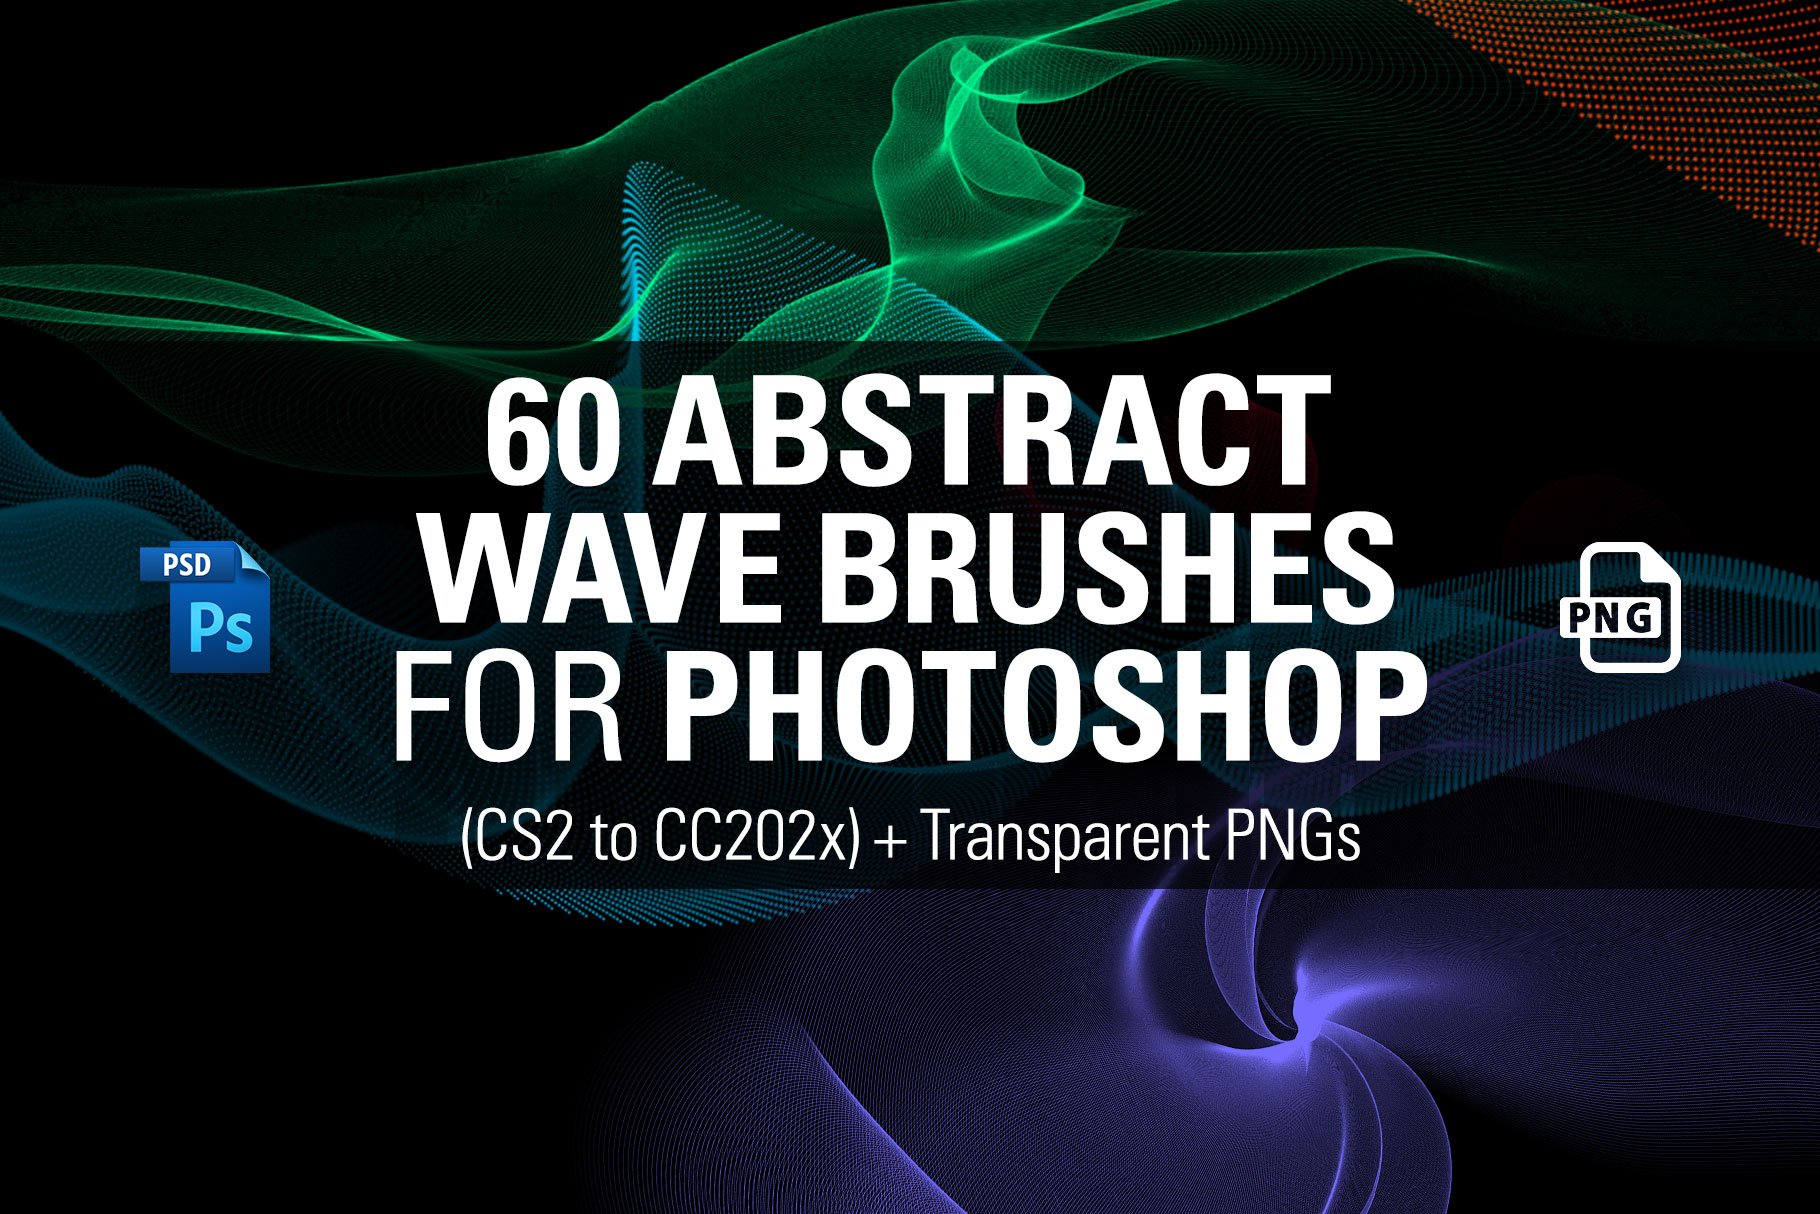 60 Abstract Wave Brushes for PSpreview image.